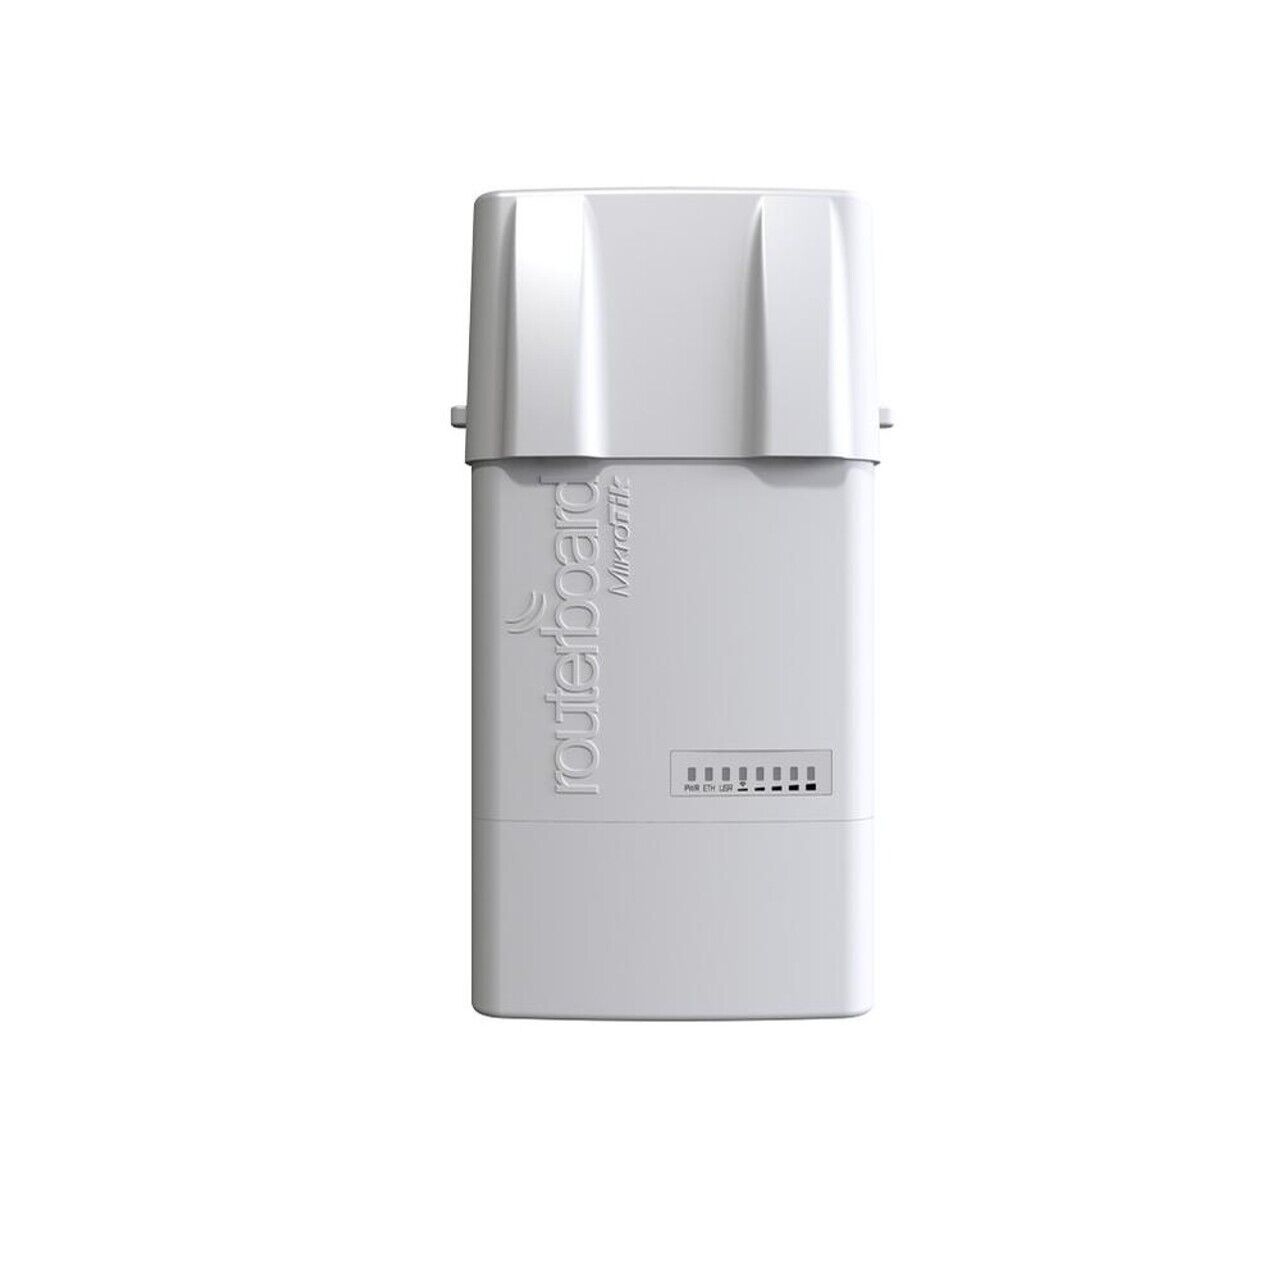 Mikrotik BaseBox5 RB912UAG-5HPnD-OUT-US Dual Band Wireless Device Outdoor